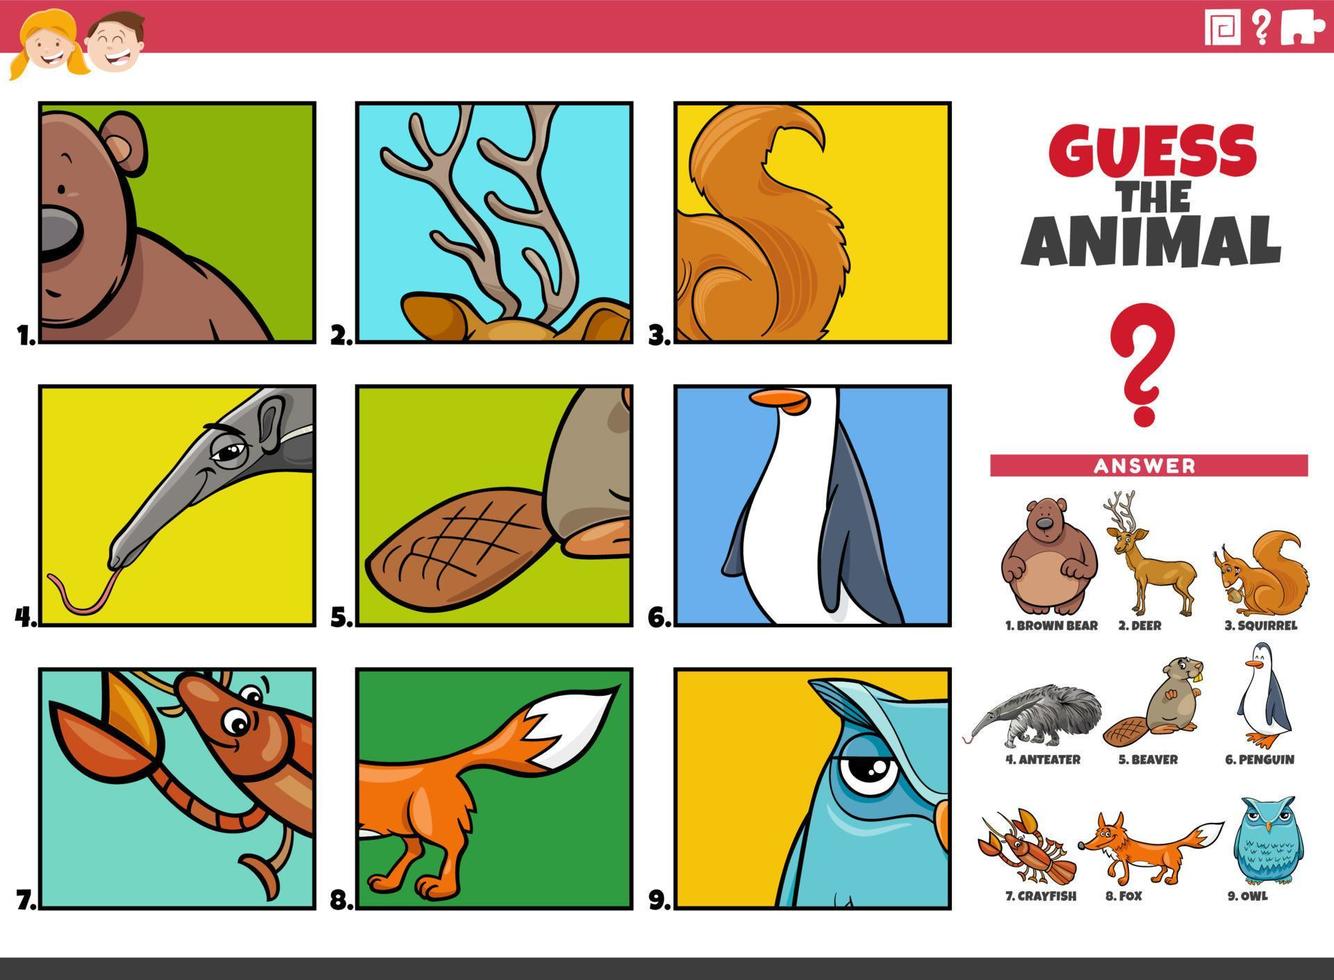 guess cartoon animal characters educational task for children vector